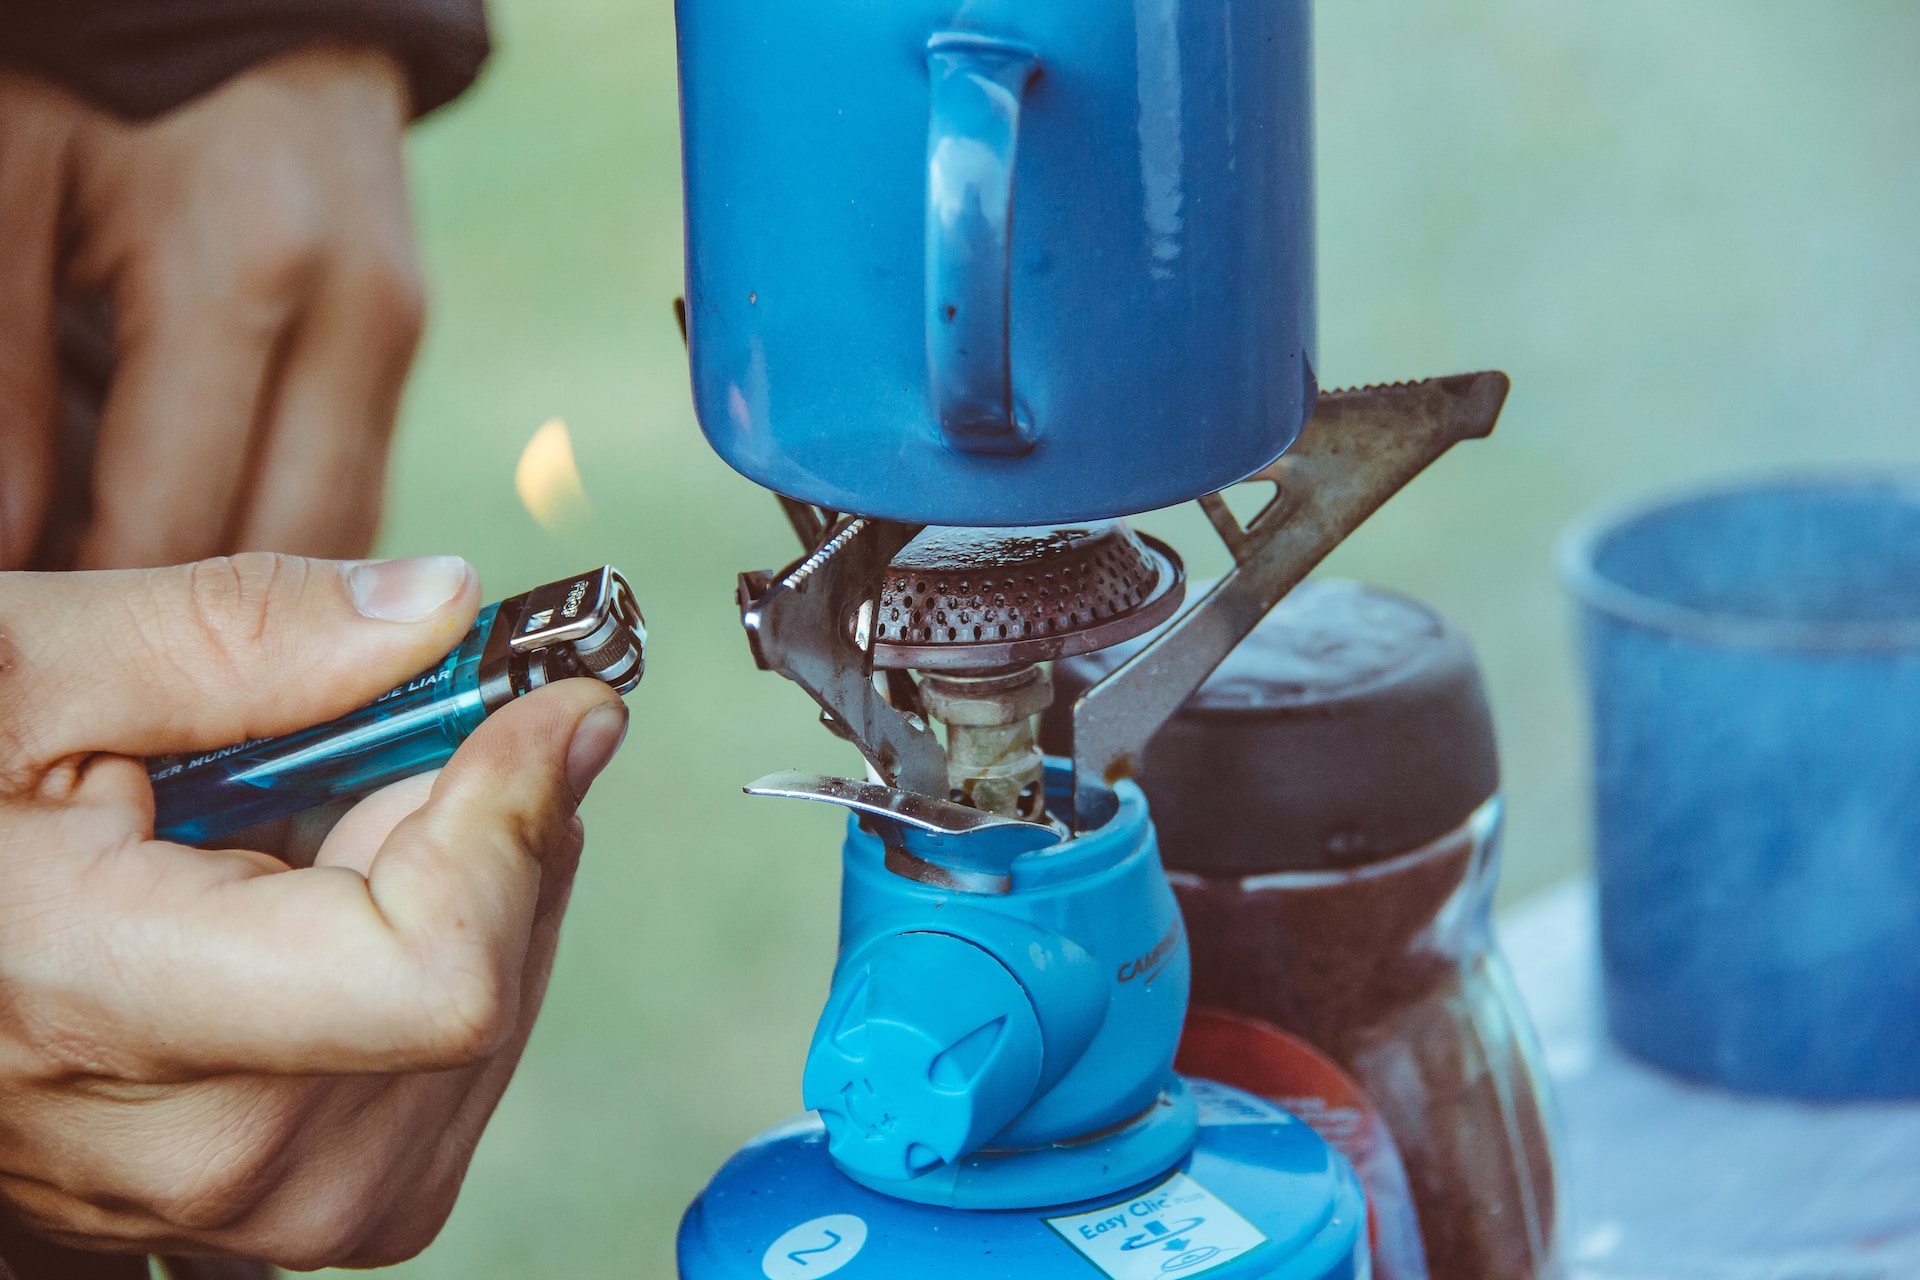 Lighting up a backpacking stove